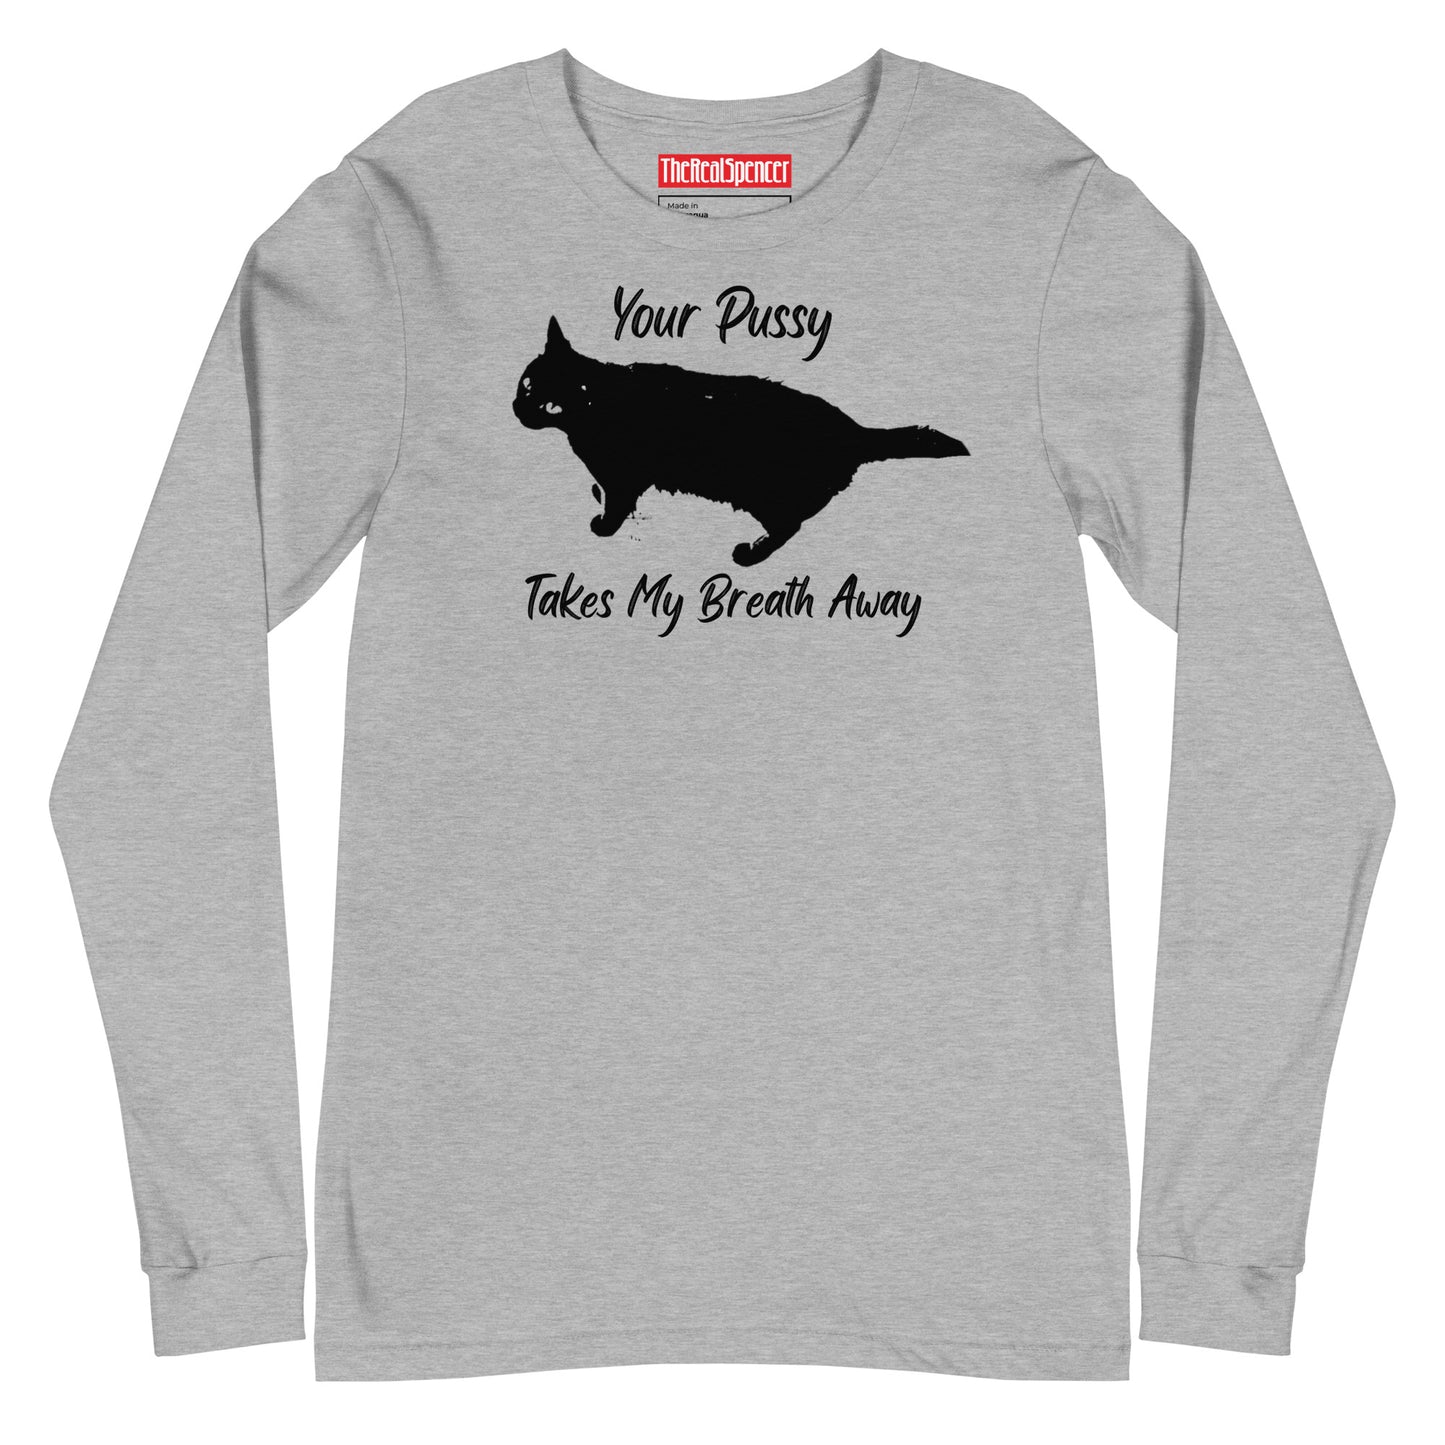 Your Pussy Takes My Breath Away Long Sleeve Tee